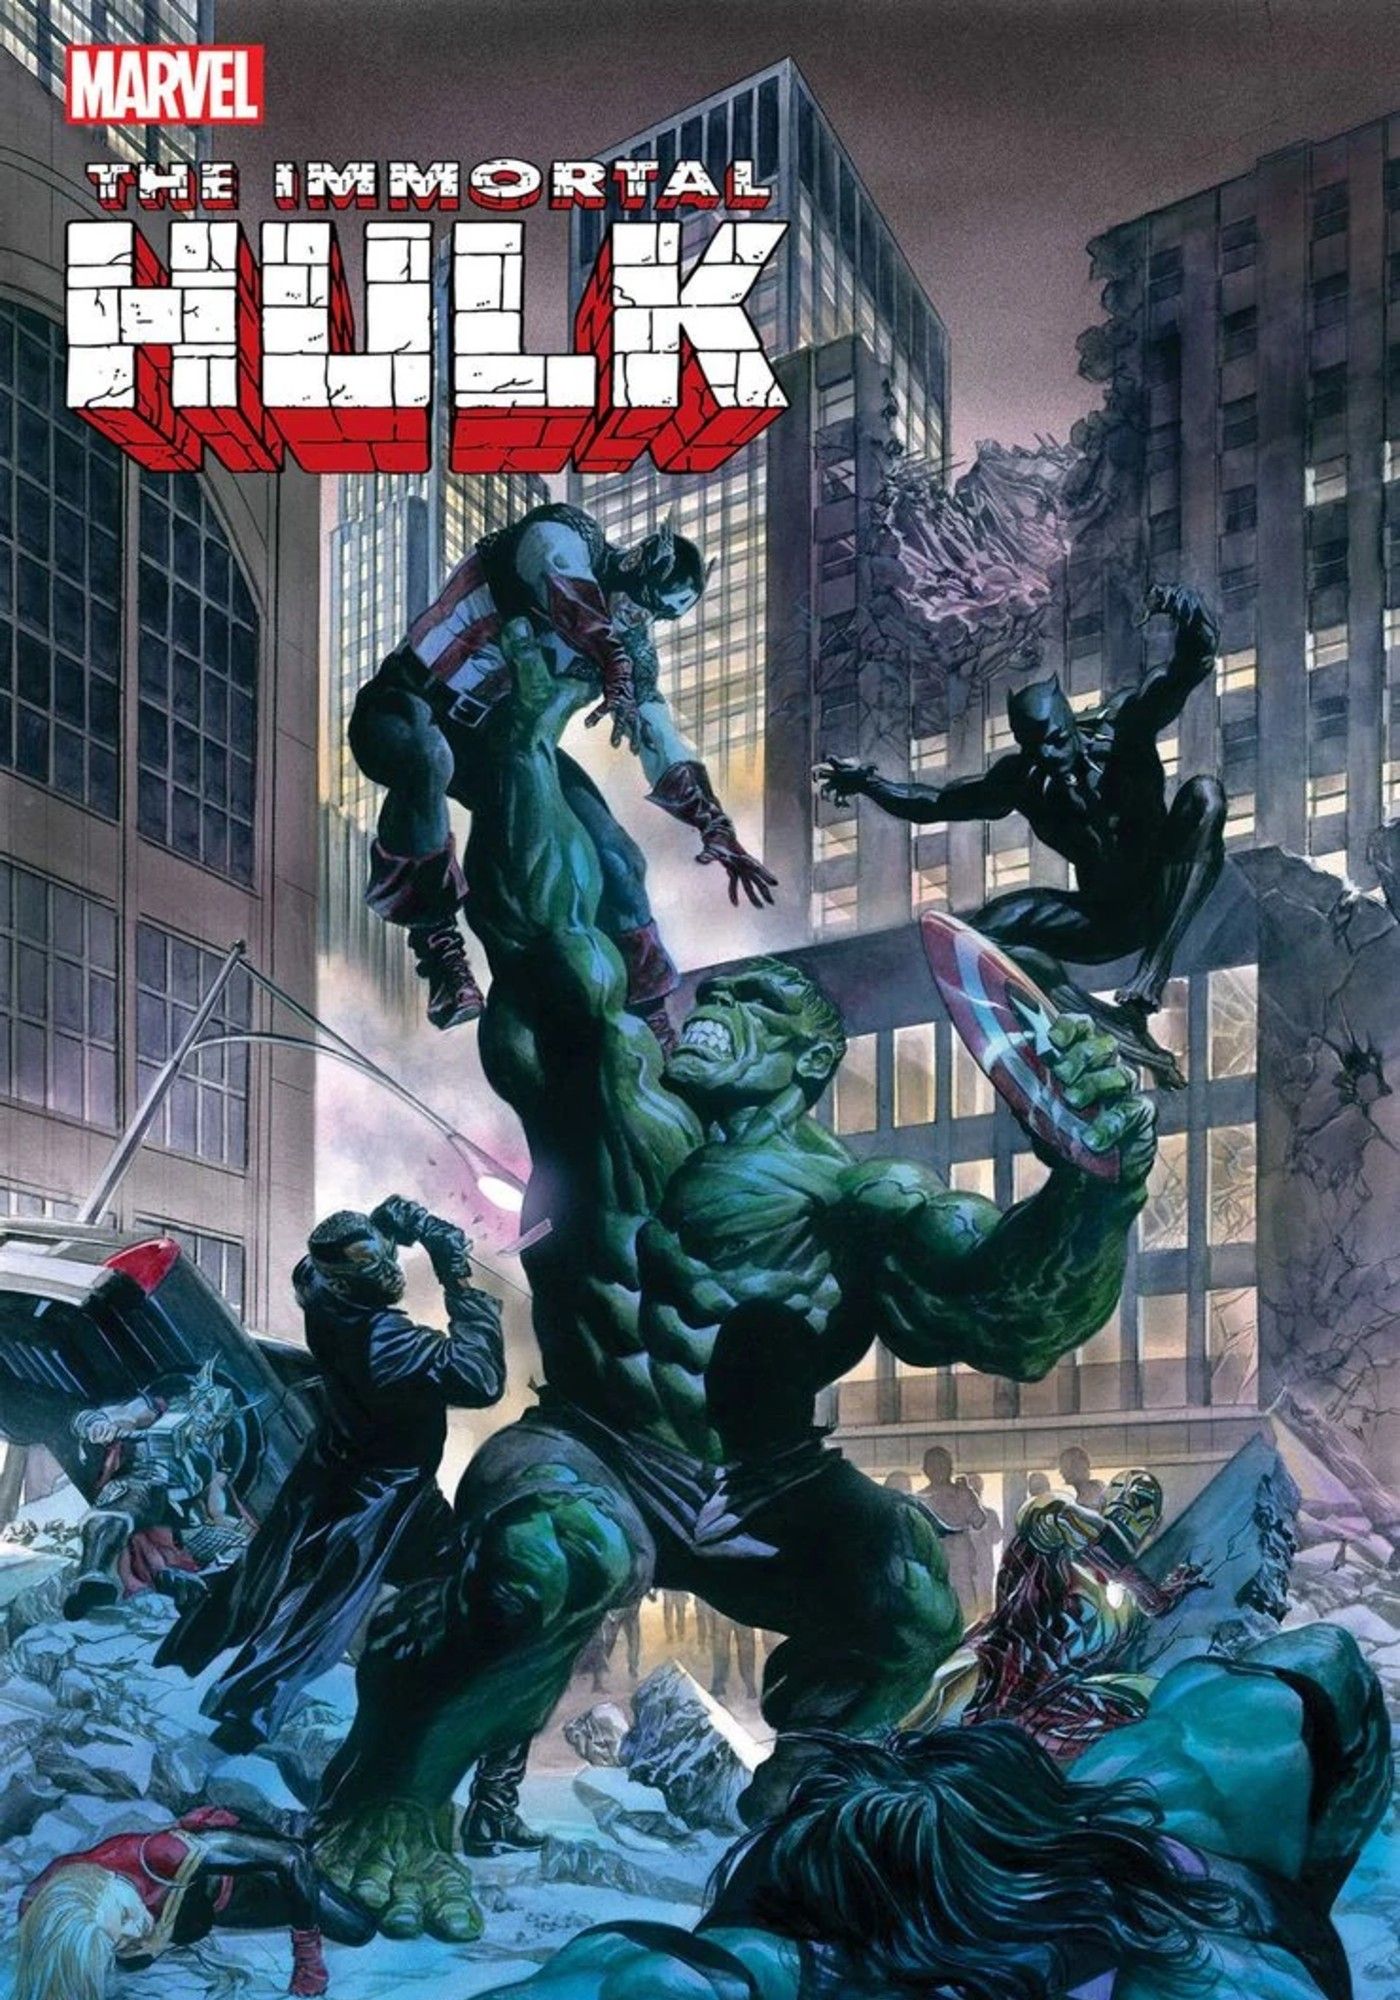 Hulk Crushes the Avengers in Jaw-Dropping New Cover Art